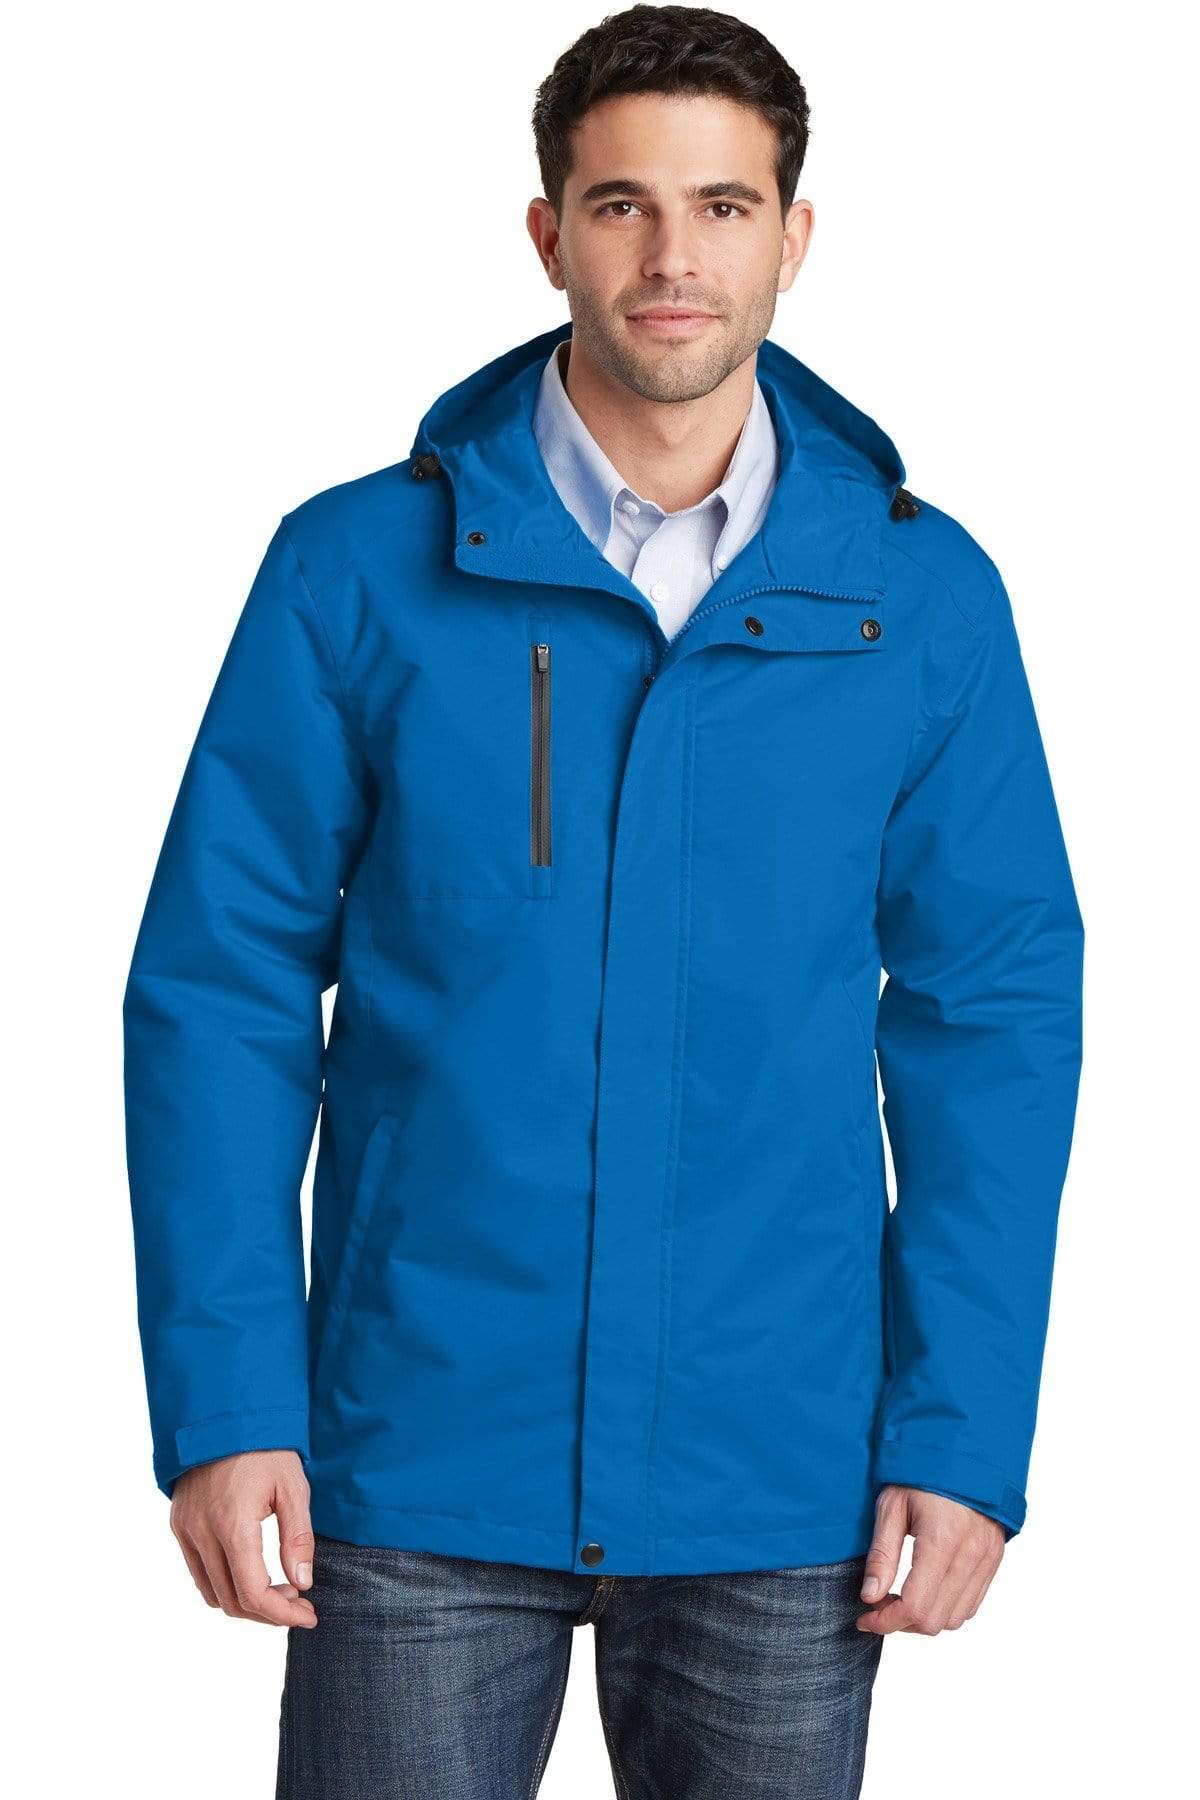 Port Authority All-Conditions Jacket J33117013